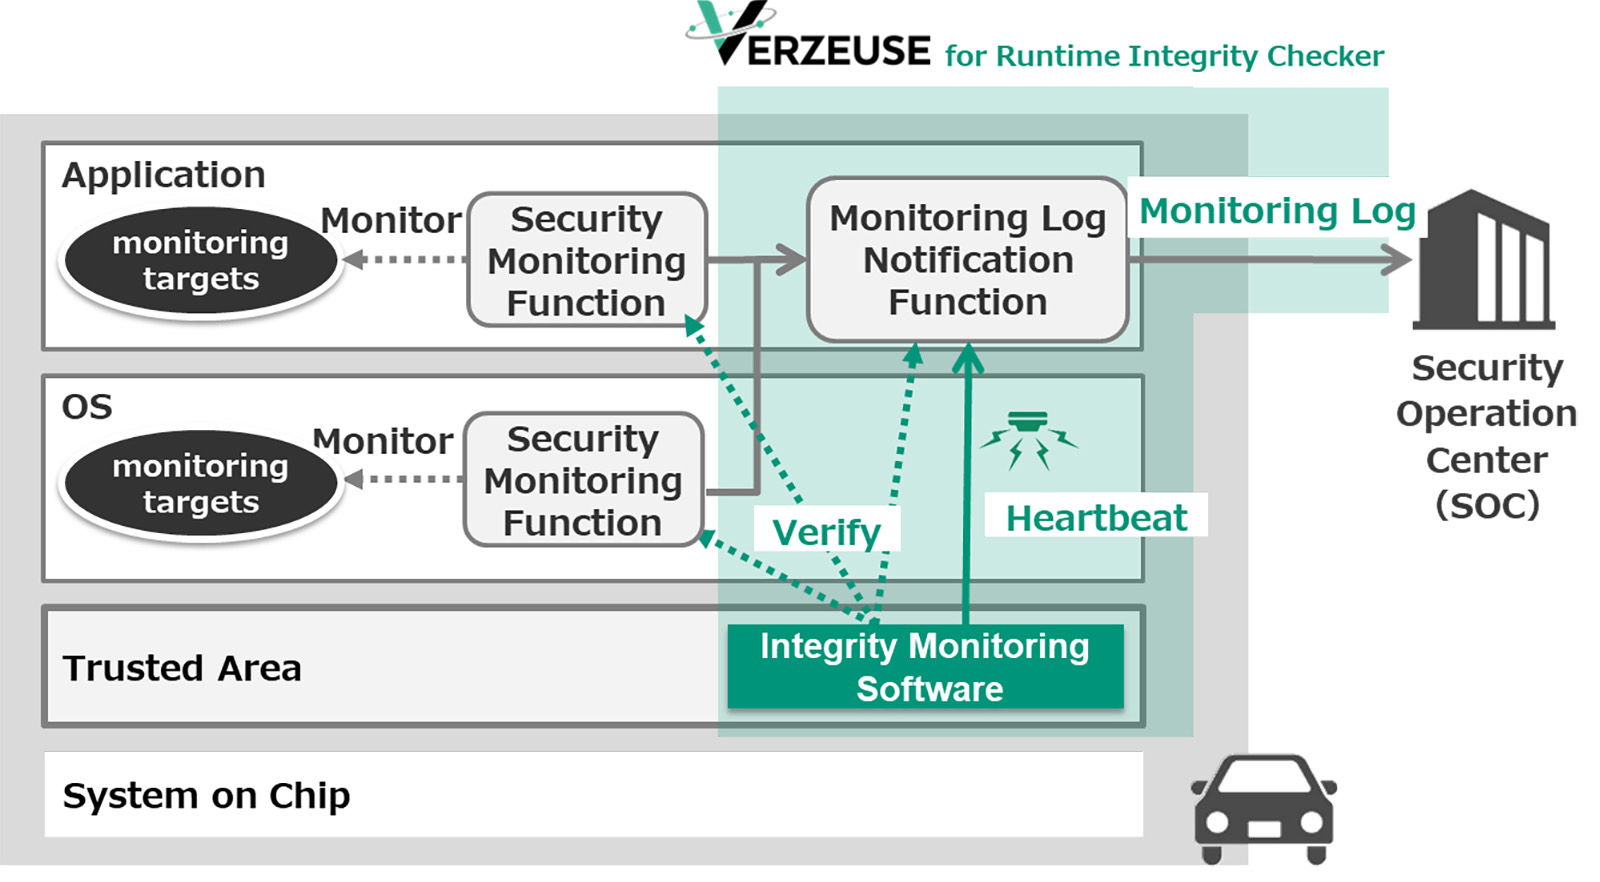 image:VERZEUSE for Runtime Integrity Checker